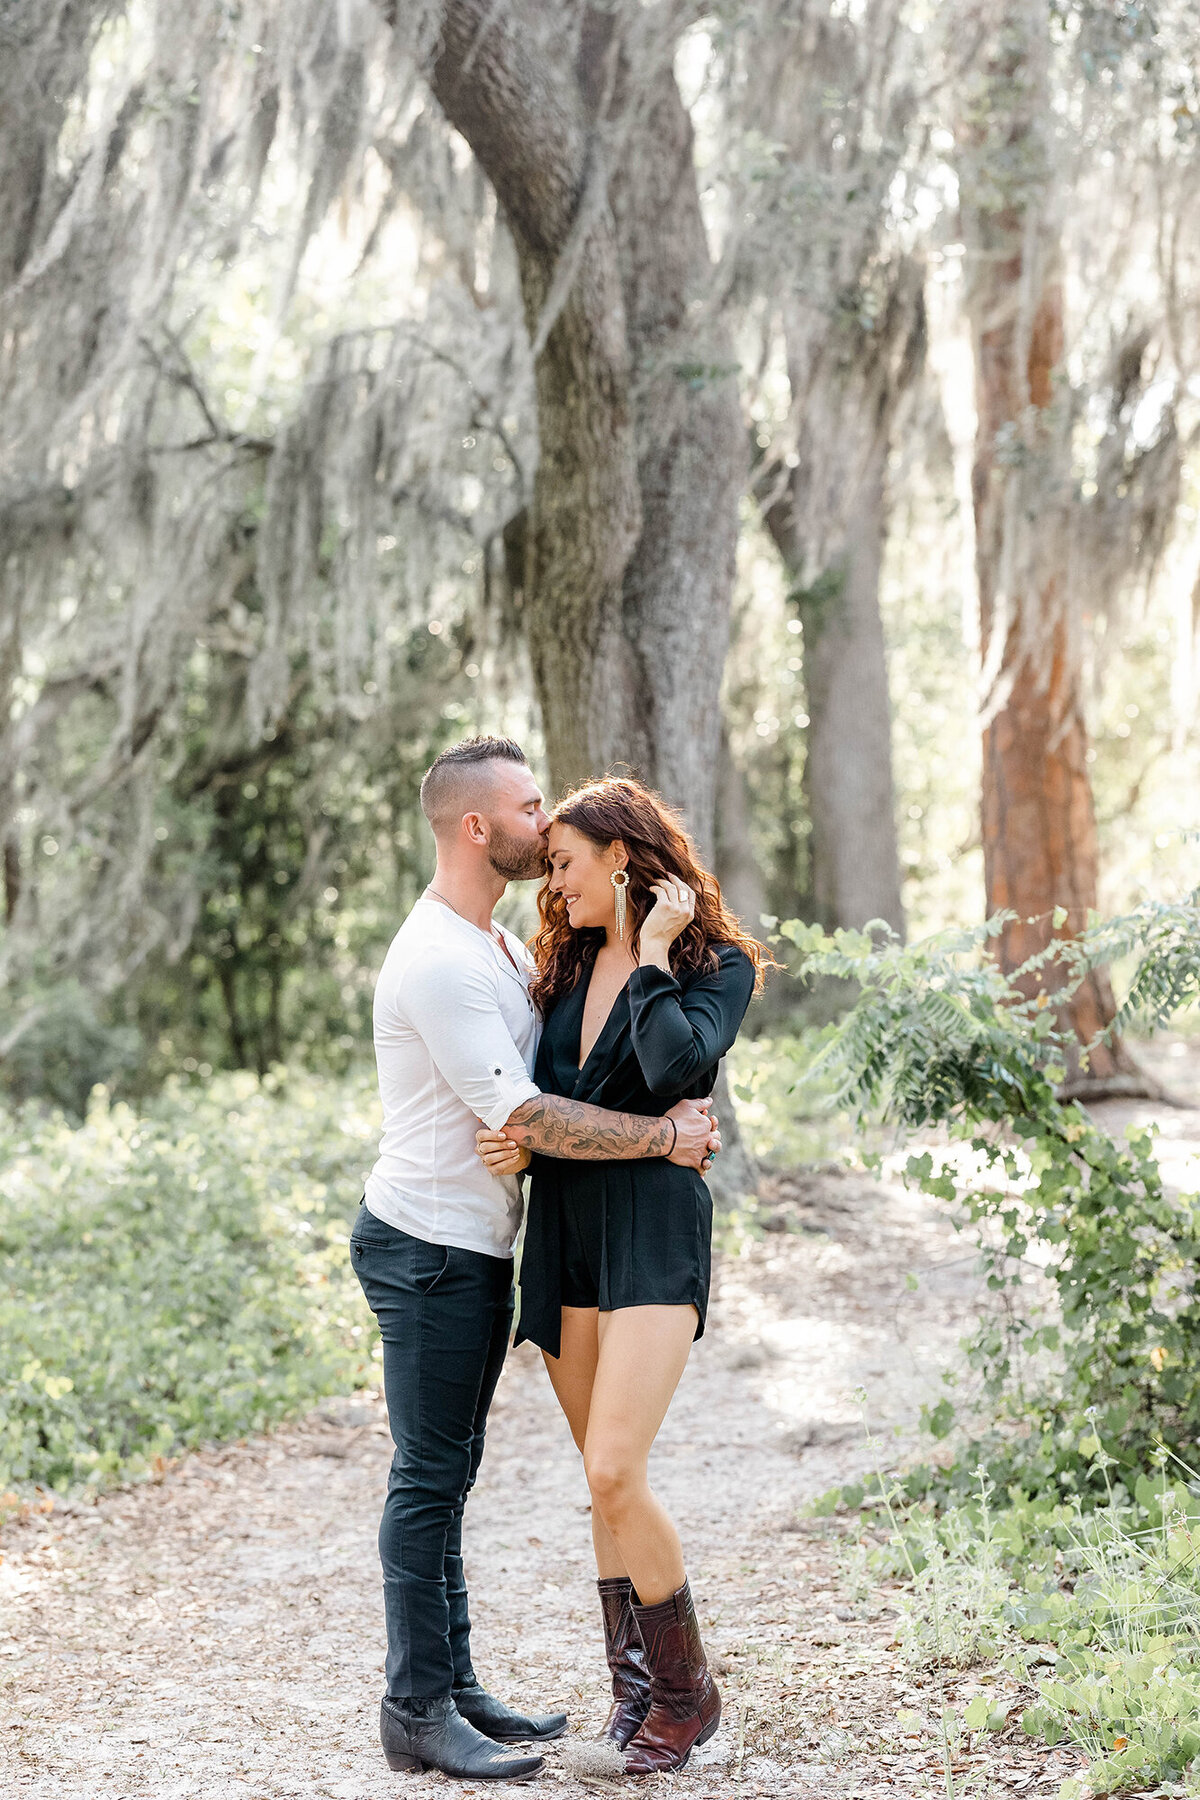 Jay Allen & Kylie Morgan at Lake Louisa State Park in Clermont Florida